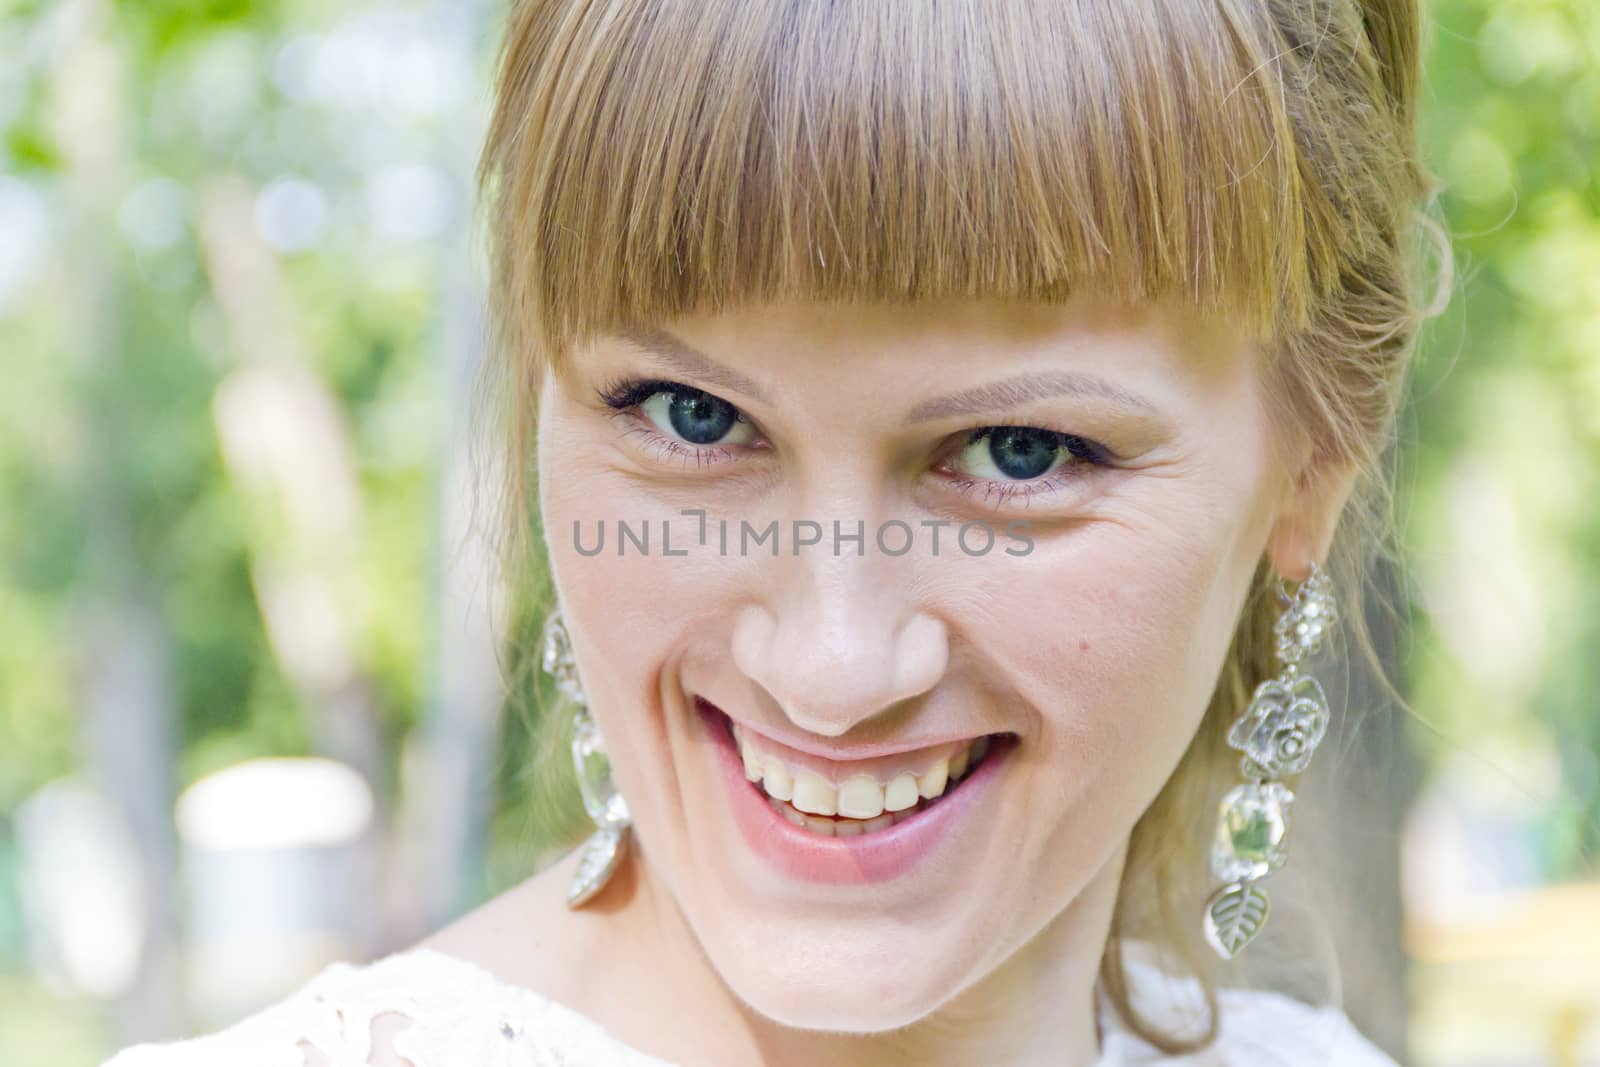 Horizontal portrait of smiling girl with blond hair on green background